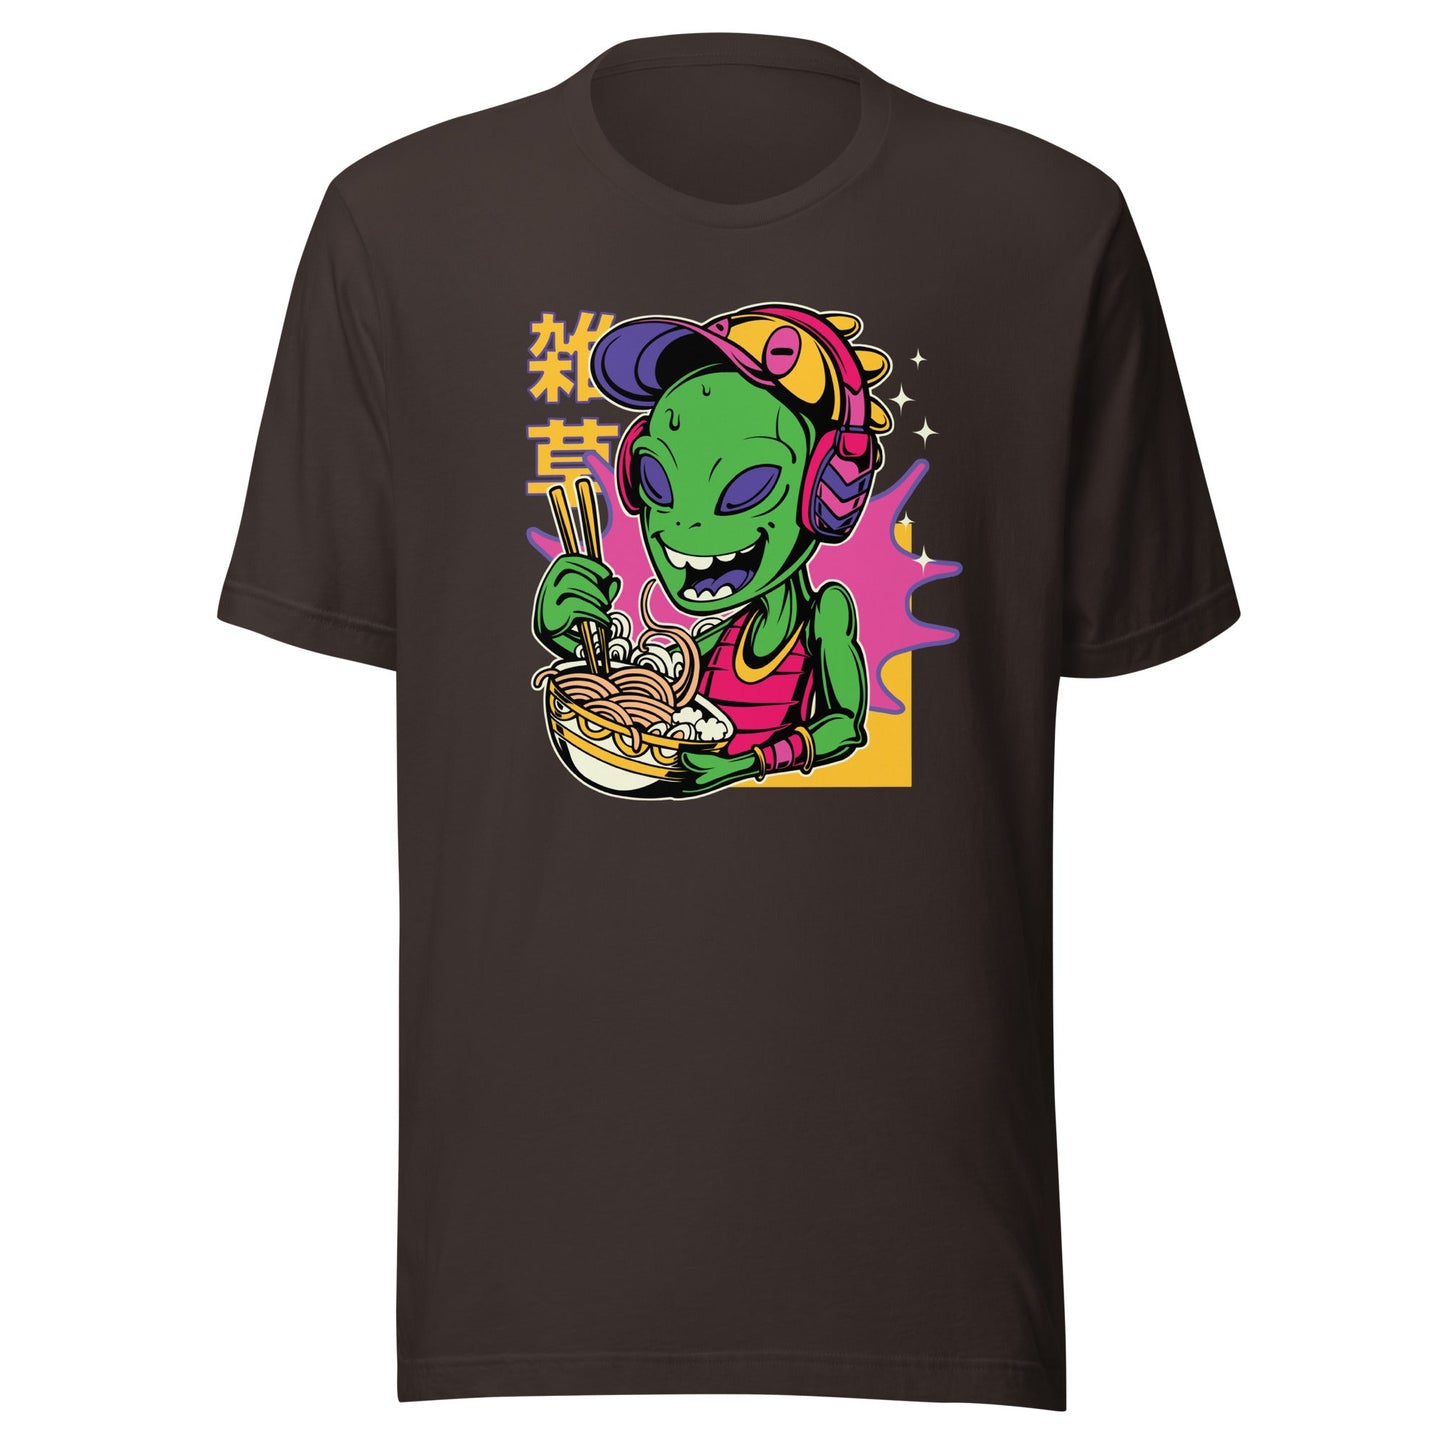 Alien Eating T-Shirt - Fun and Quirky Design | Express Your Extraterrestrial Side